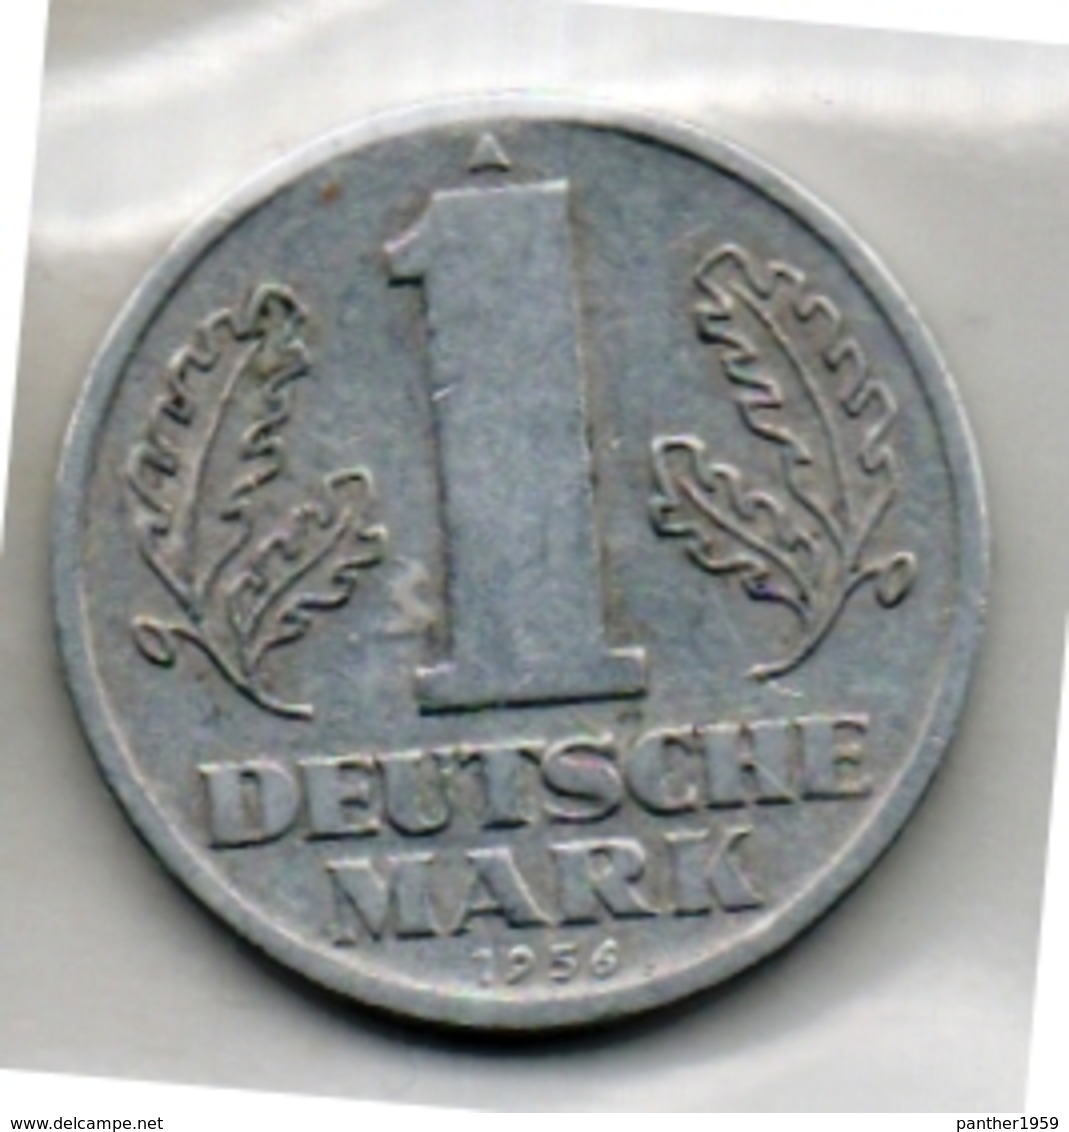 GERMANY DEMOCRATIC REPUBLIC:#COINS# IN MIXED CONDITION#.(DDR-250CO-1 (14) - 1 Mark